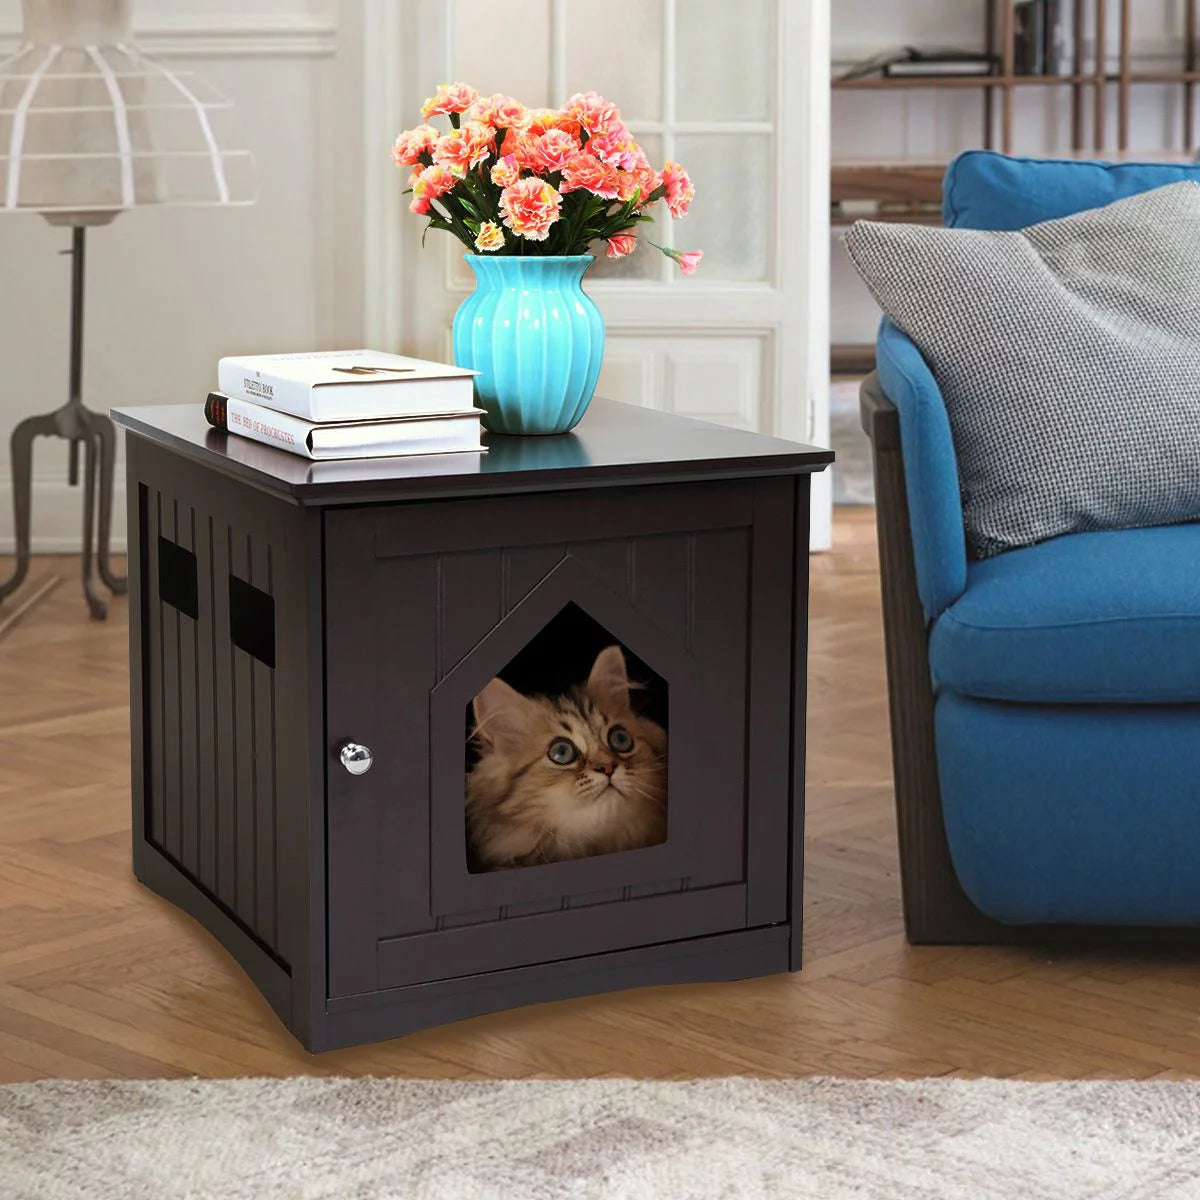 SHICHENG Decorative Cat House & Side Table - Cat Home Covered Nightstand - Indoor Pet Crate - Litter Box Enclosure - Hooded Hidden Pet Box - Cats Furniture Cabinet - Kitty Washroom